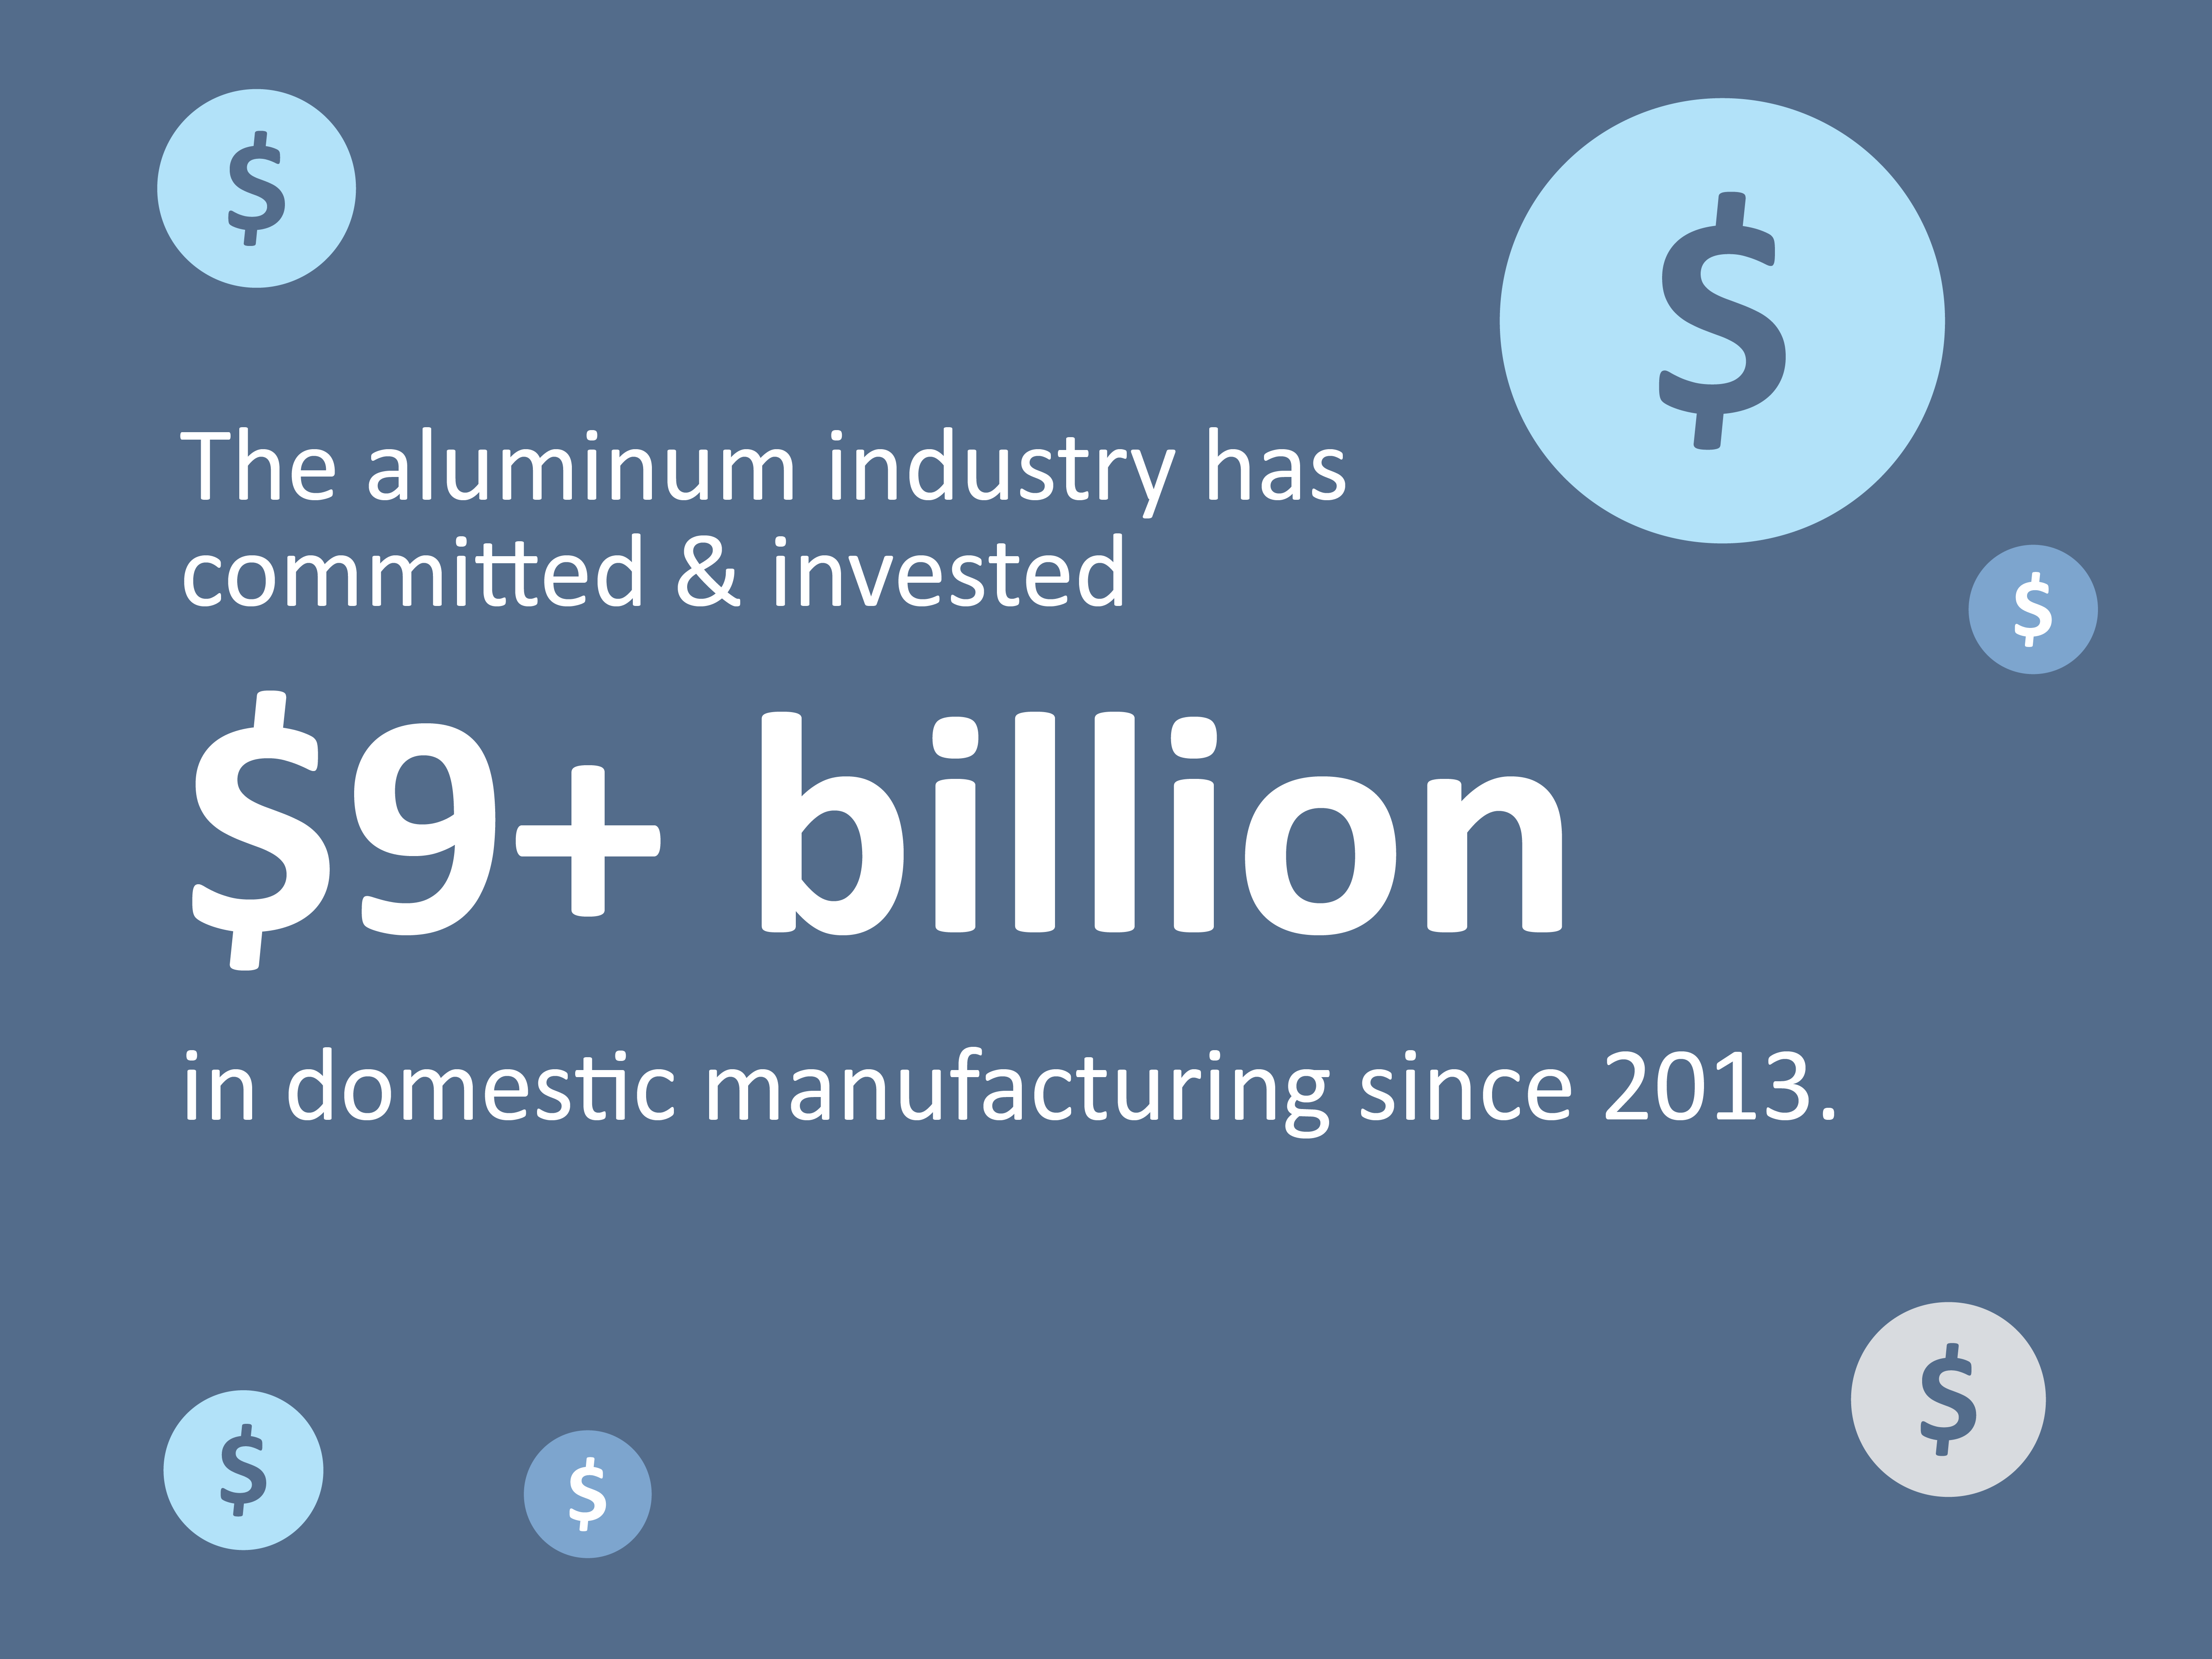 The U.S. aluminum industry has invested $9 billion in domestic manufacturing since 2019